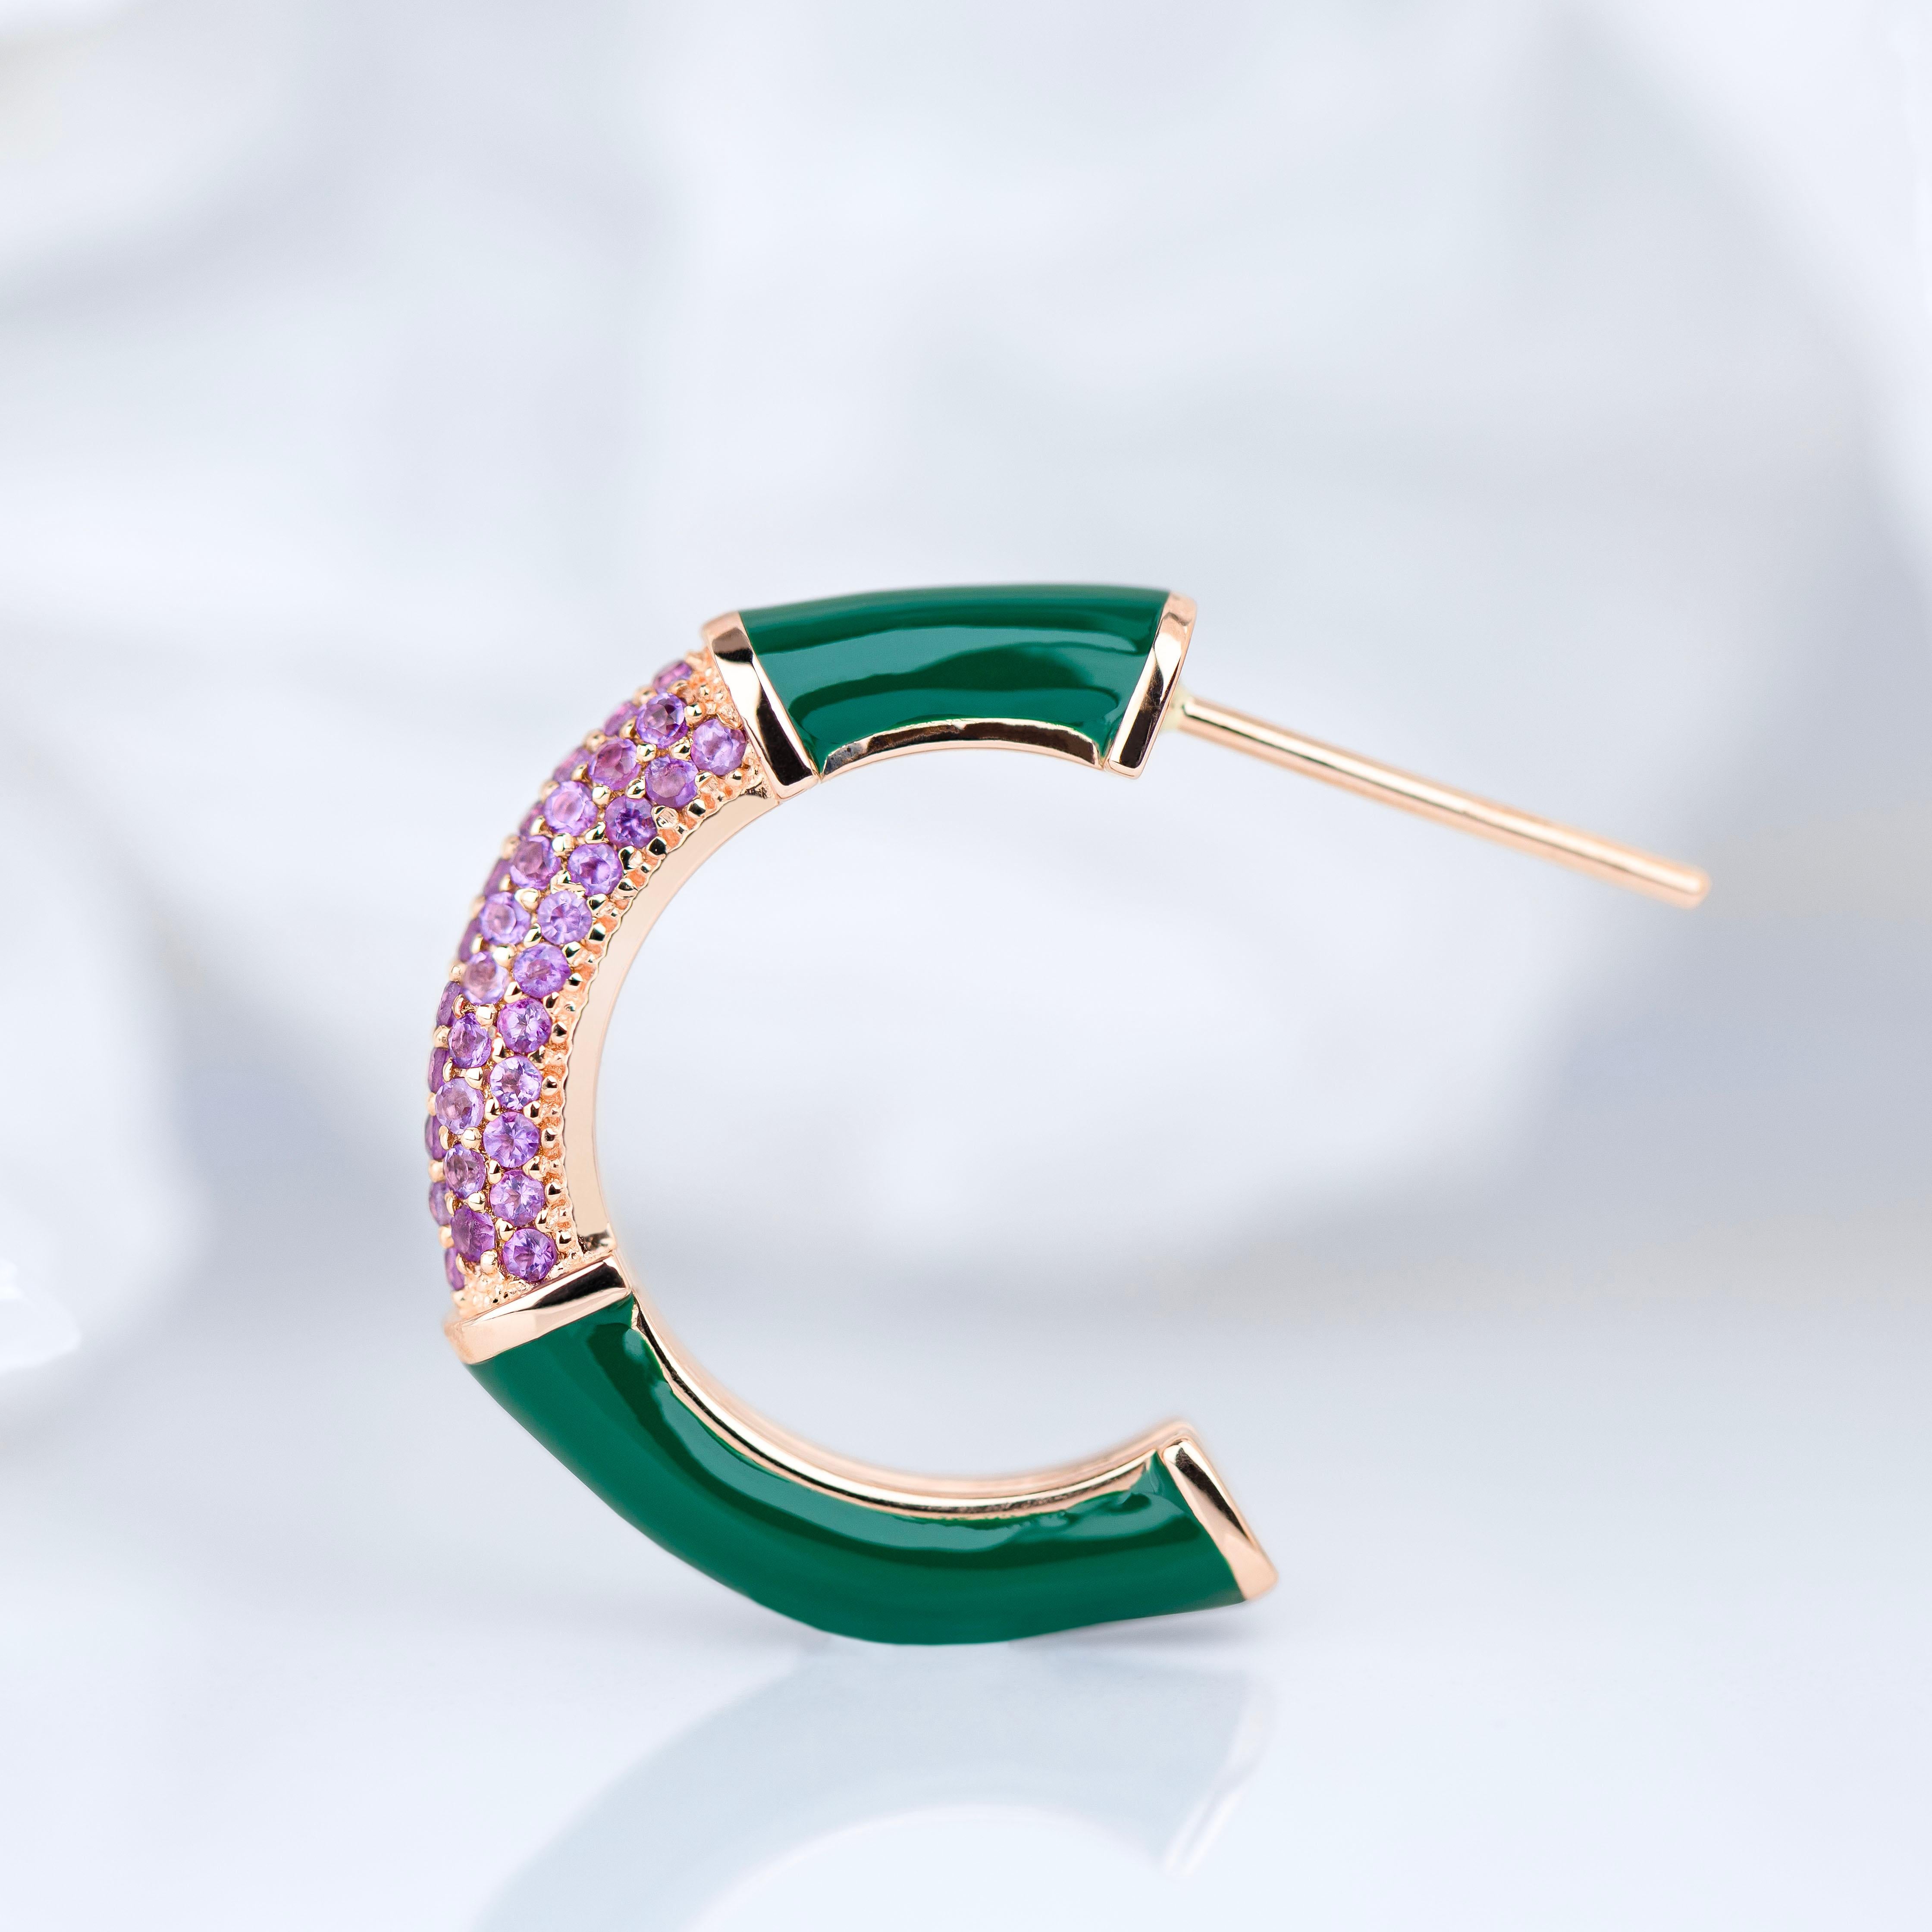 Art Deco Style Gold Earring with Amethyst Stone, Bumble Colors Earring
This ring was made with quality materials and excellent handwork. I guarantee the quality assurance of my handwork and materials. It is vital for me that you are totally happy